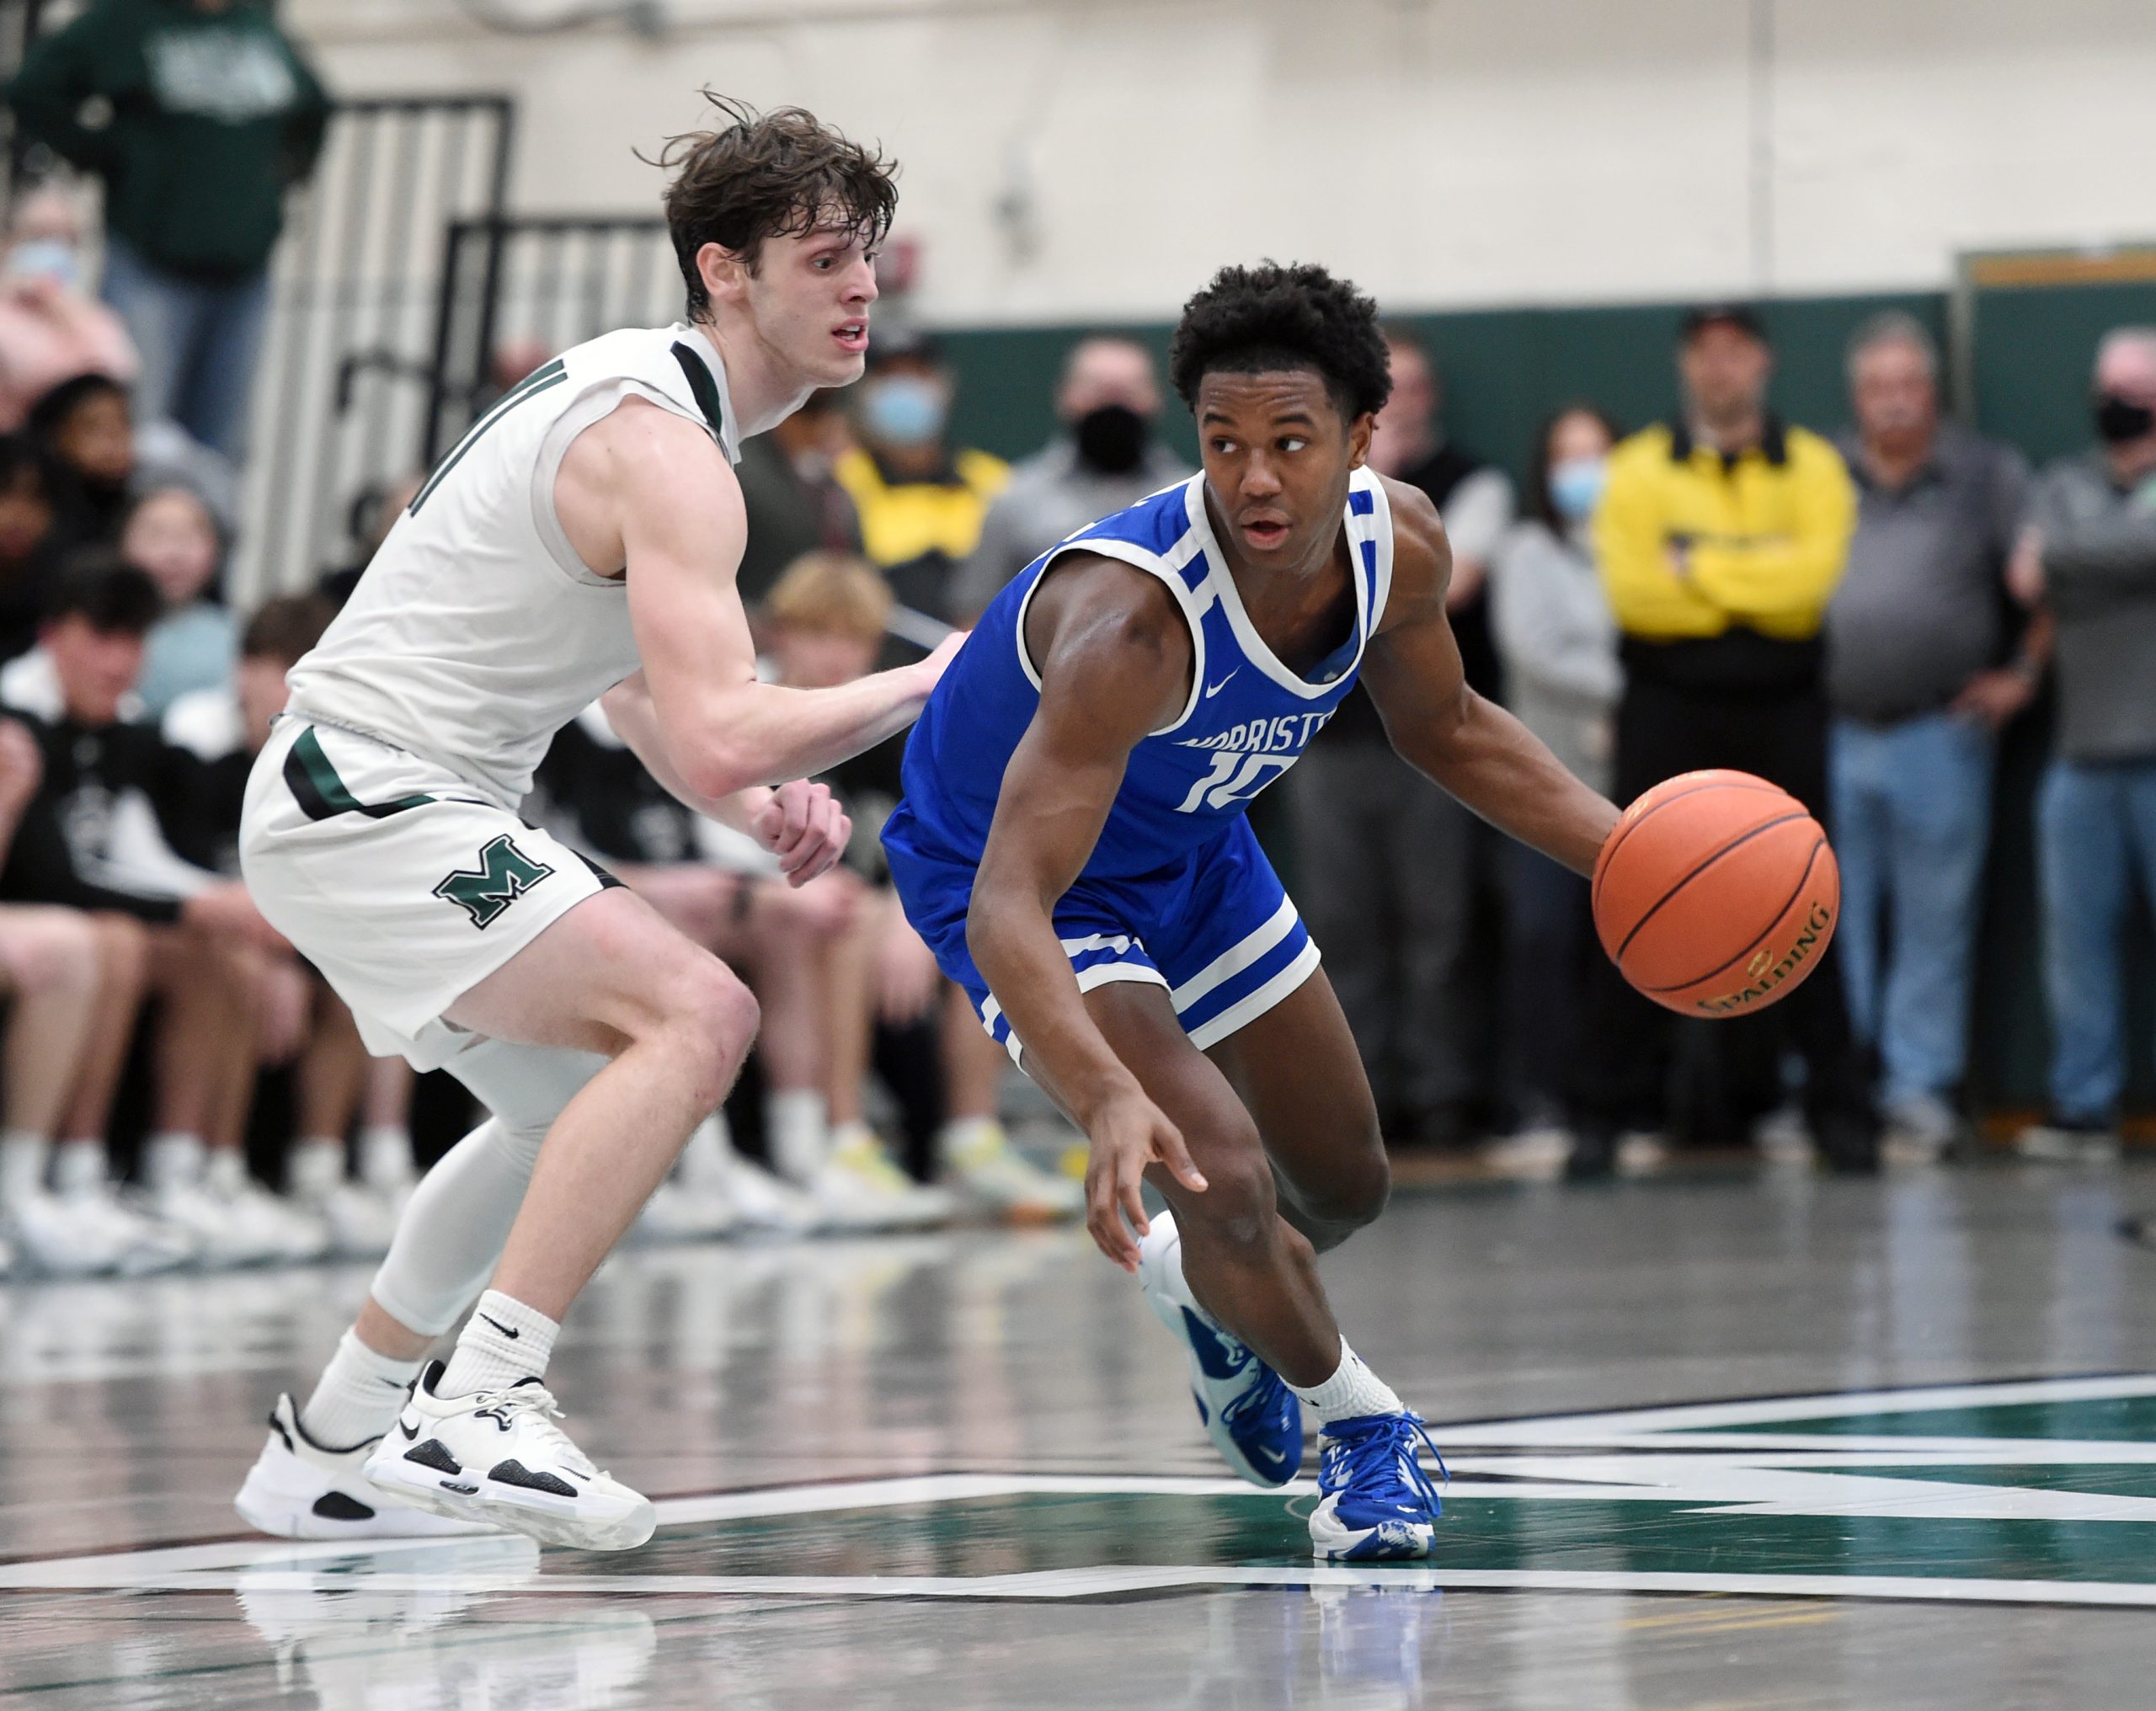 Historic boys basketball night for neighboring Norristown, Methacton and PAC